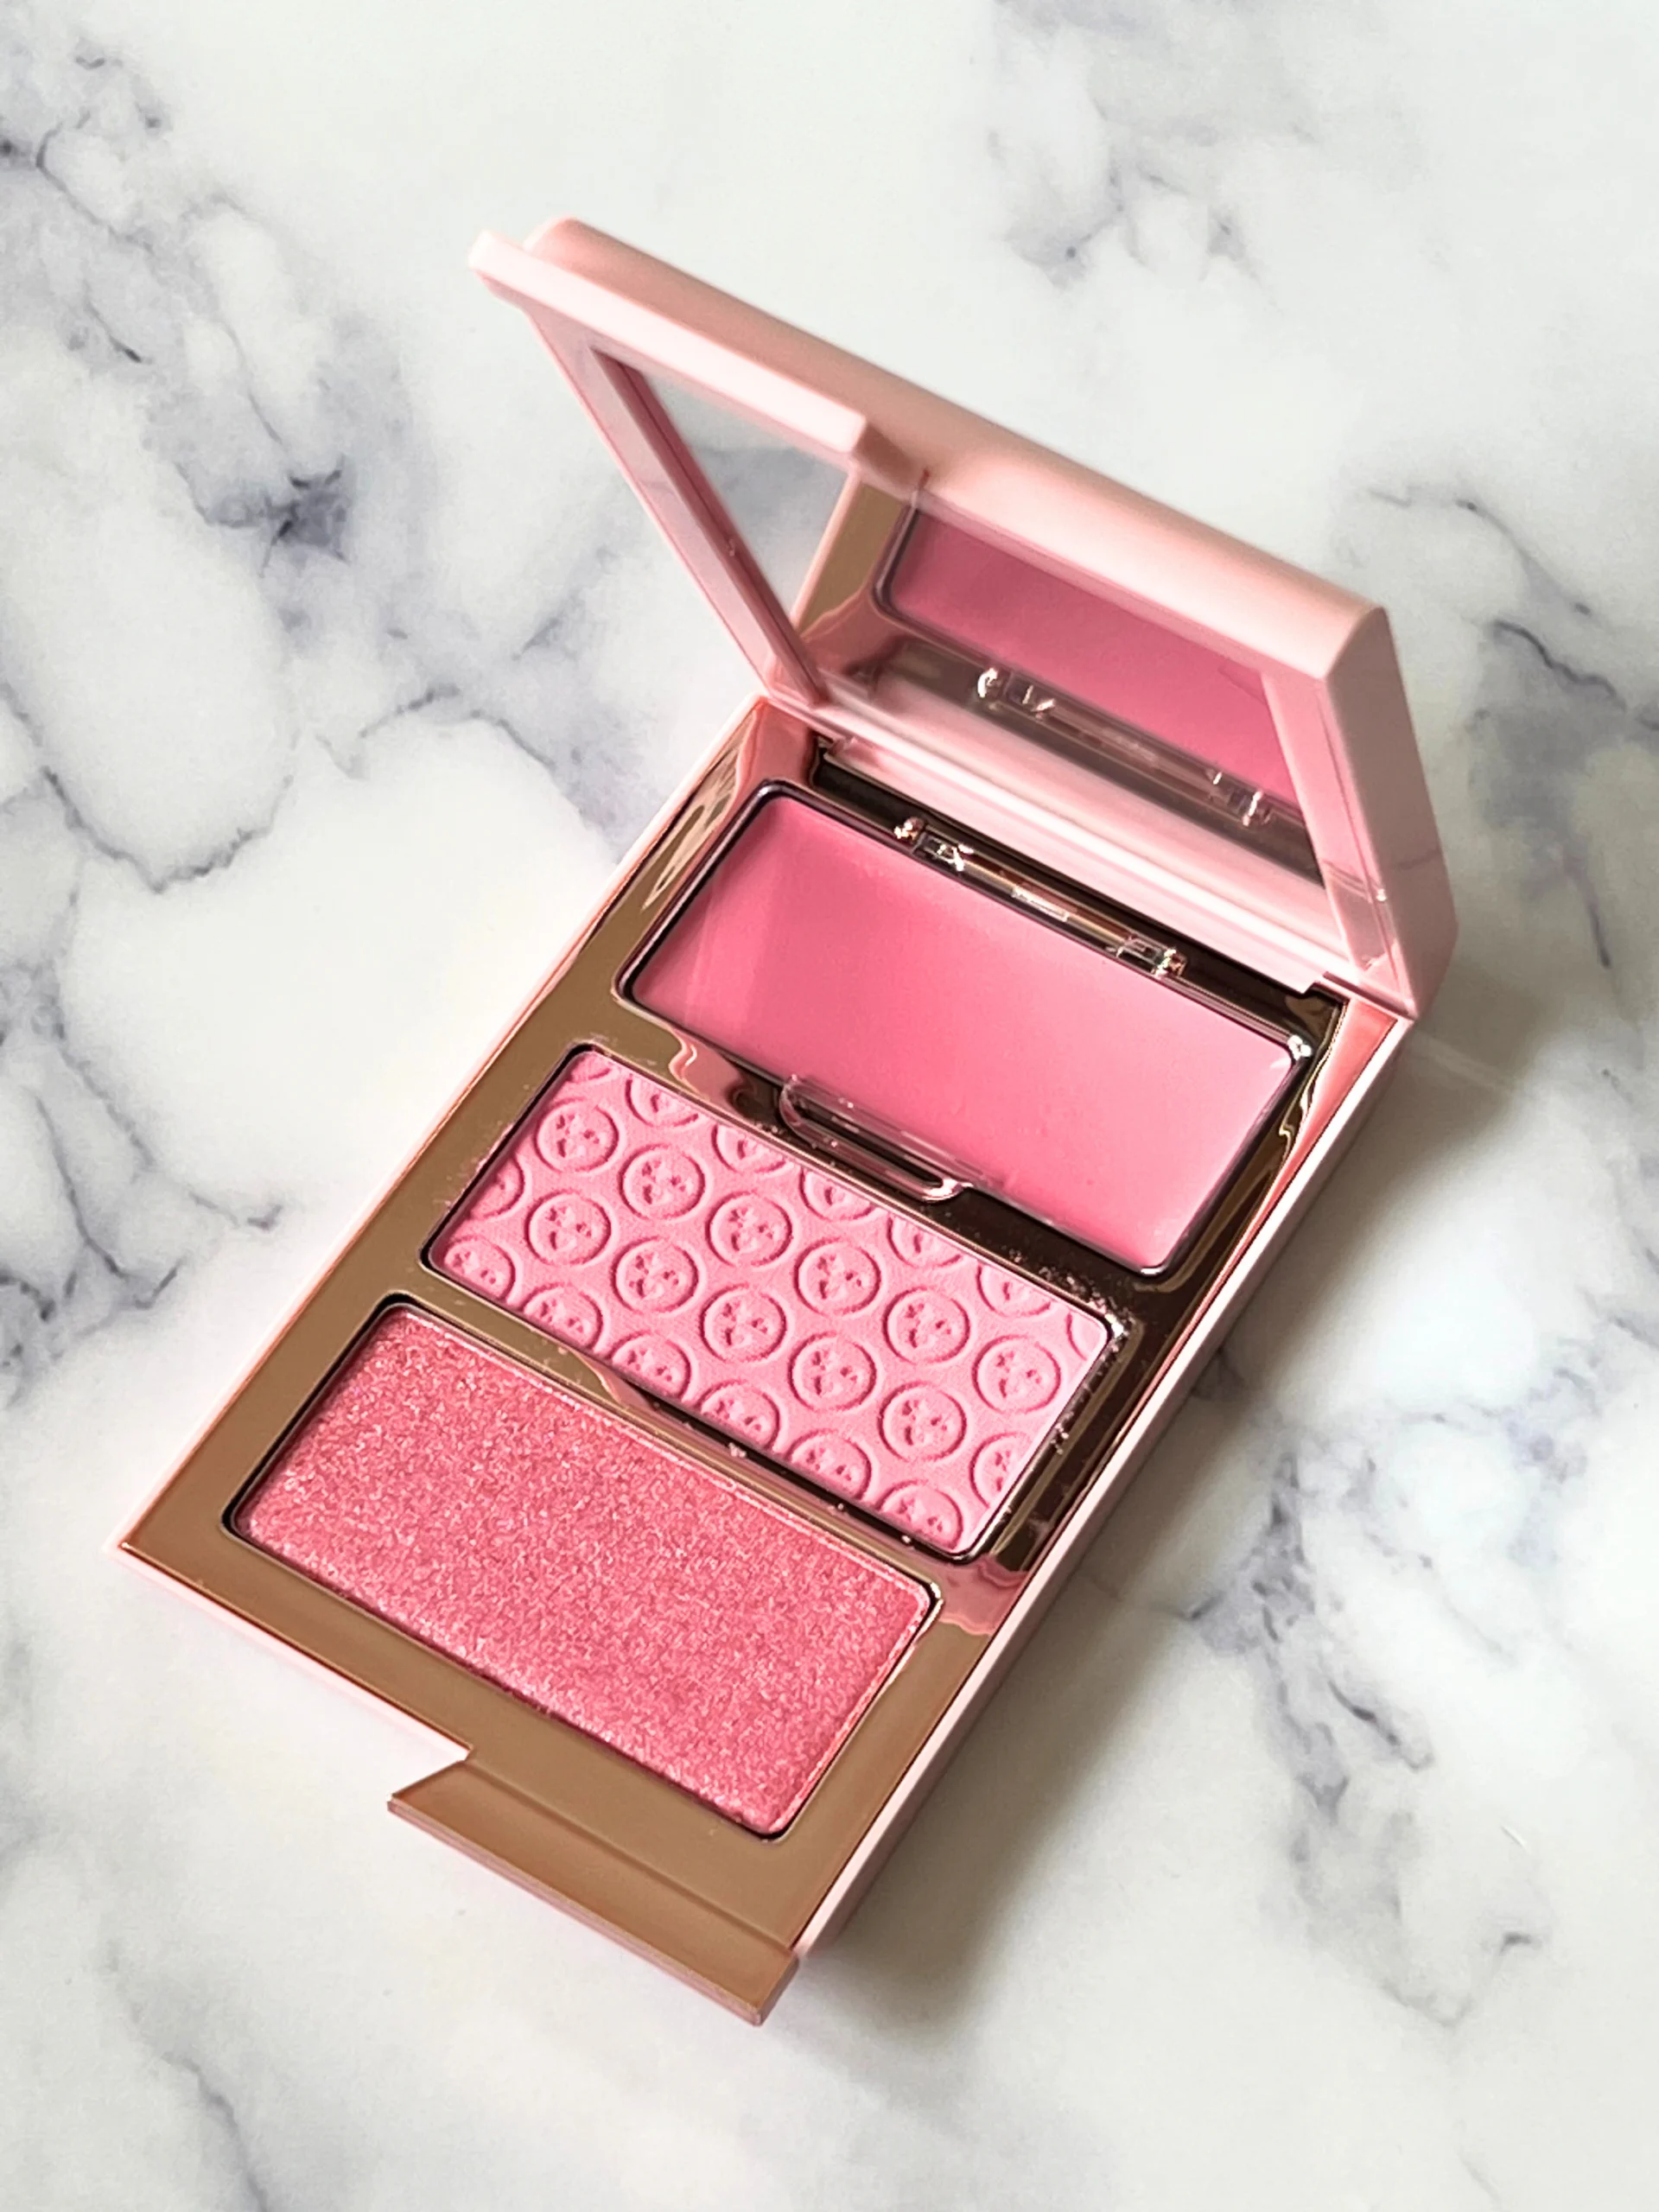 New ONE/SIZE By Patrick Starr Cheek Clapper 3D Blush-Attention Seeker